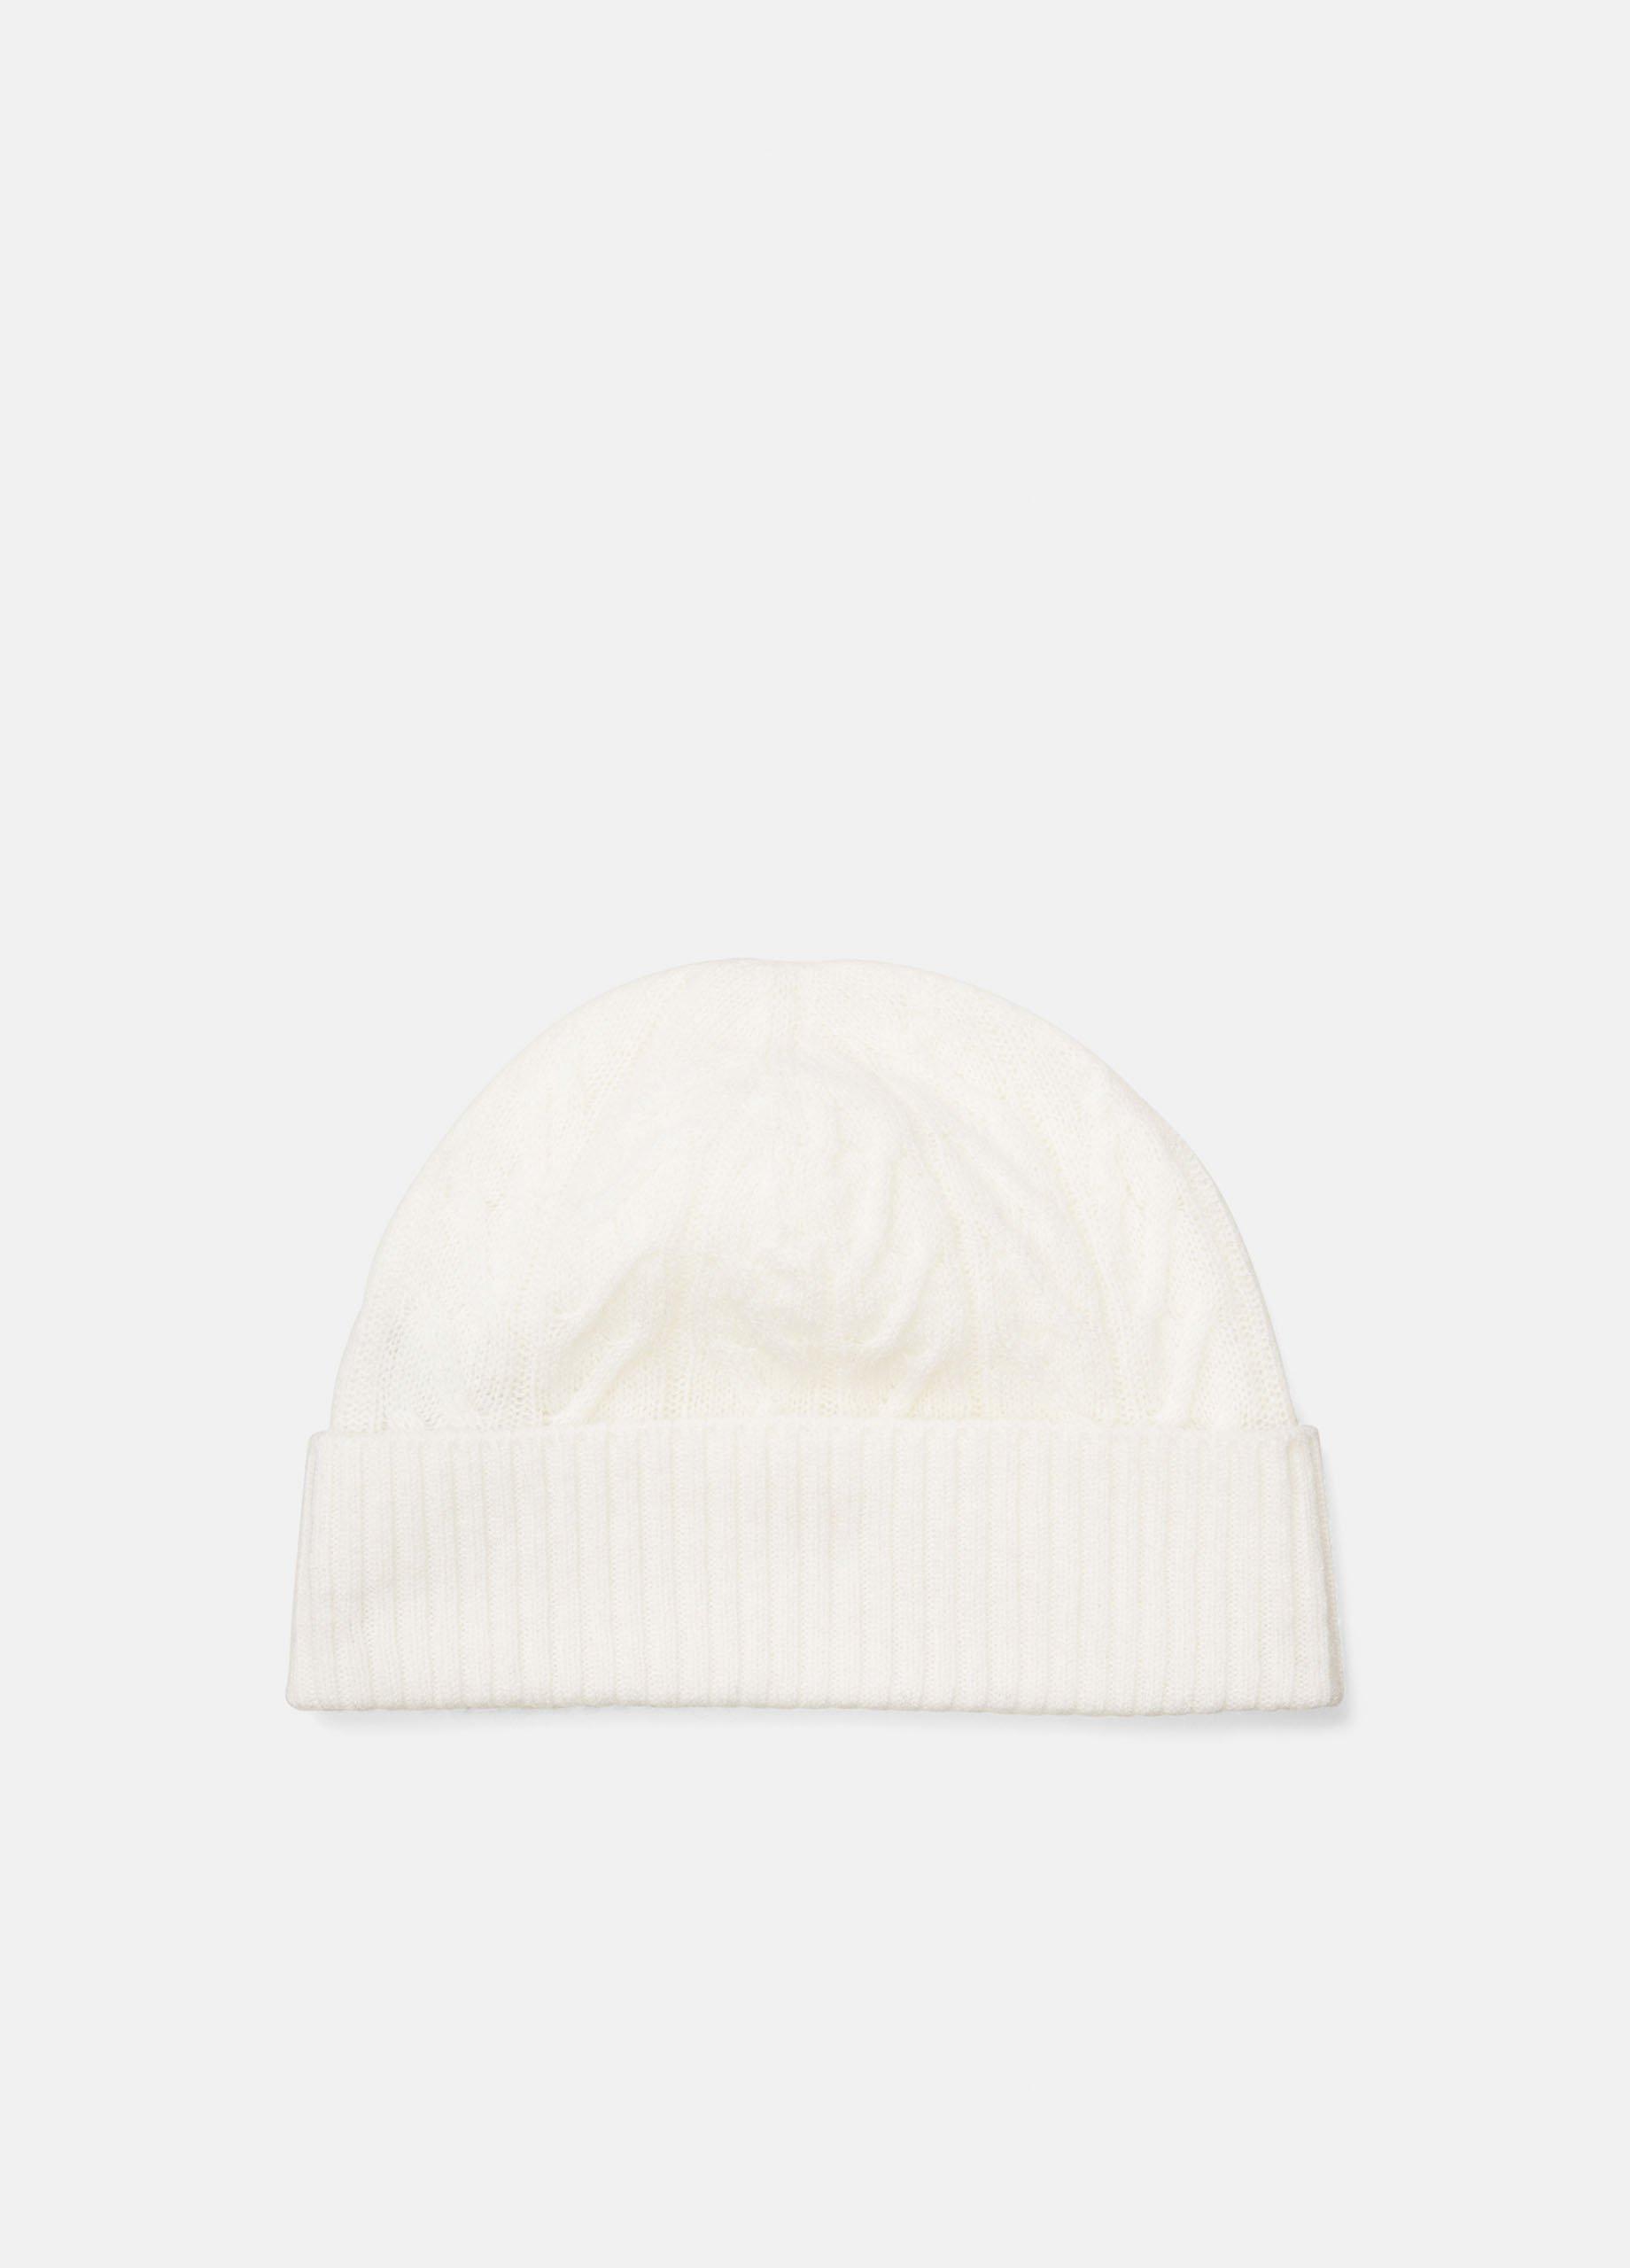 Baby Cashmere Cable Beanie